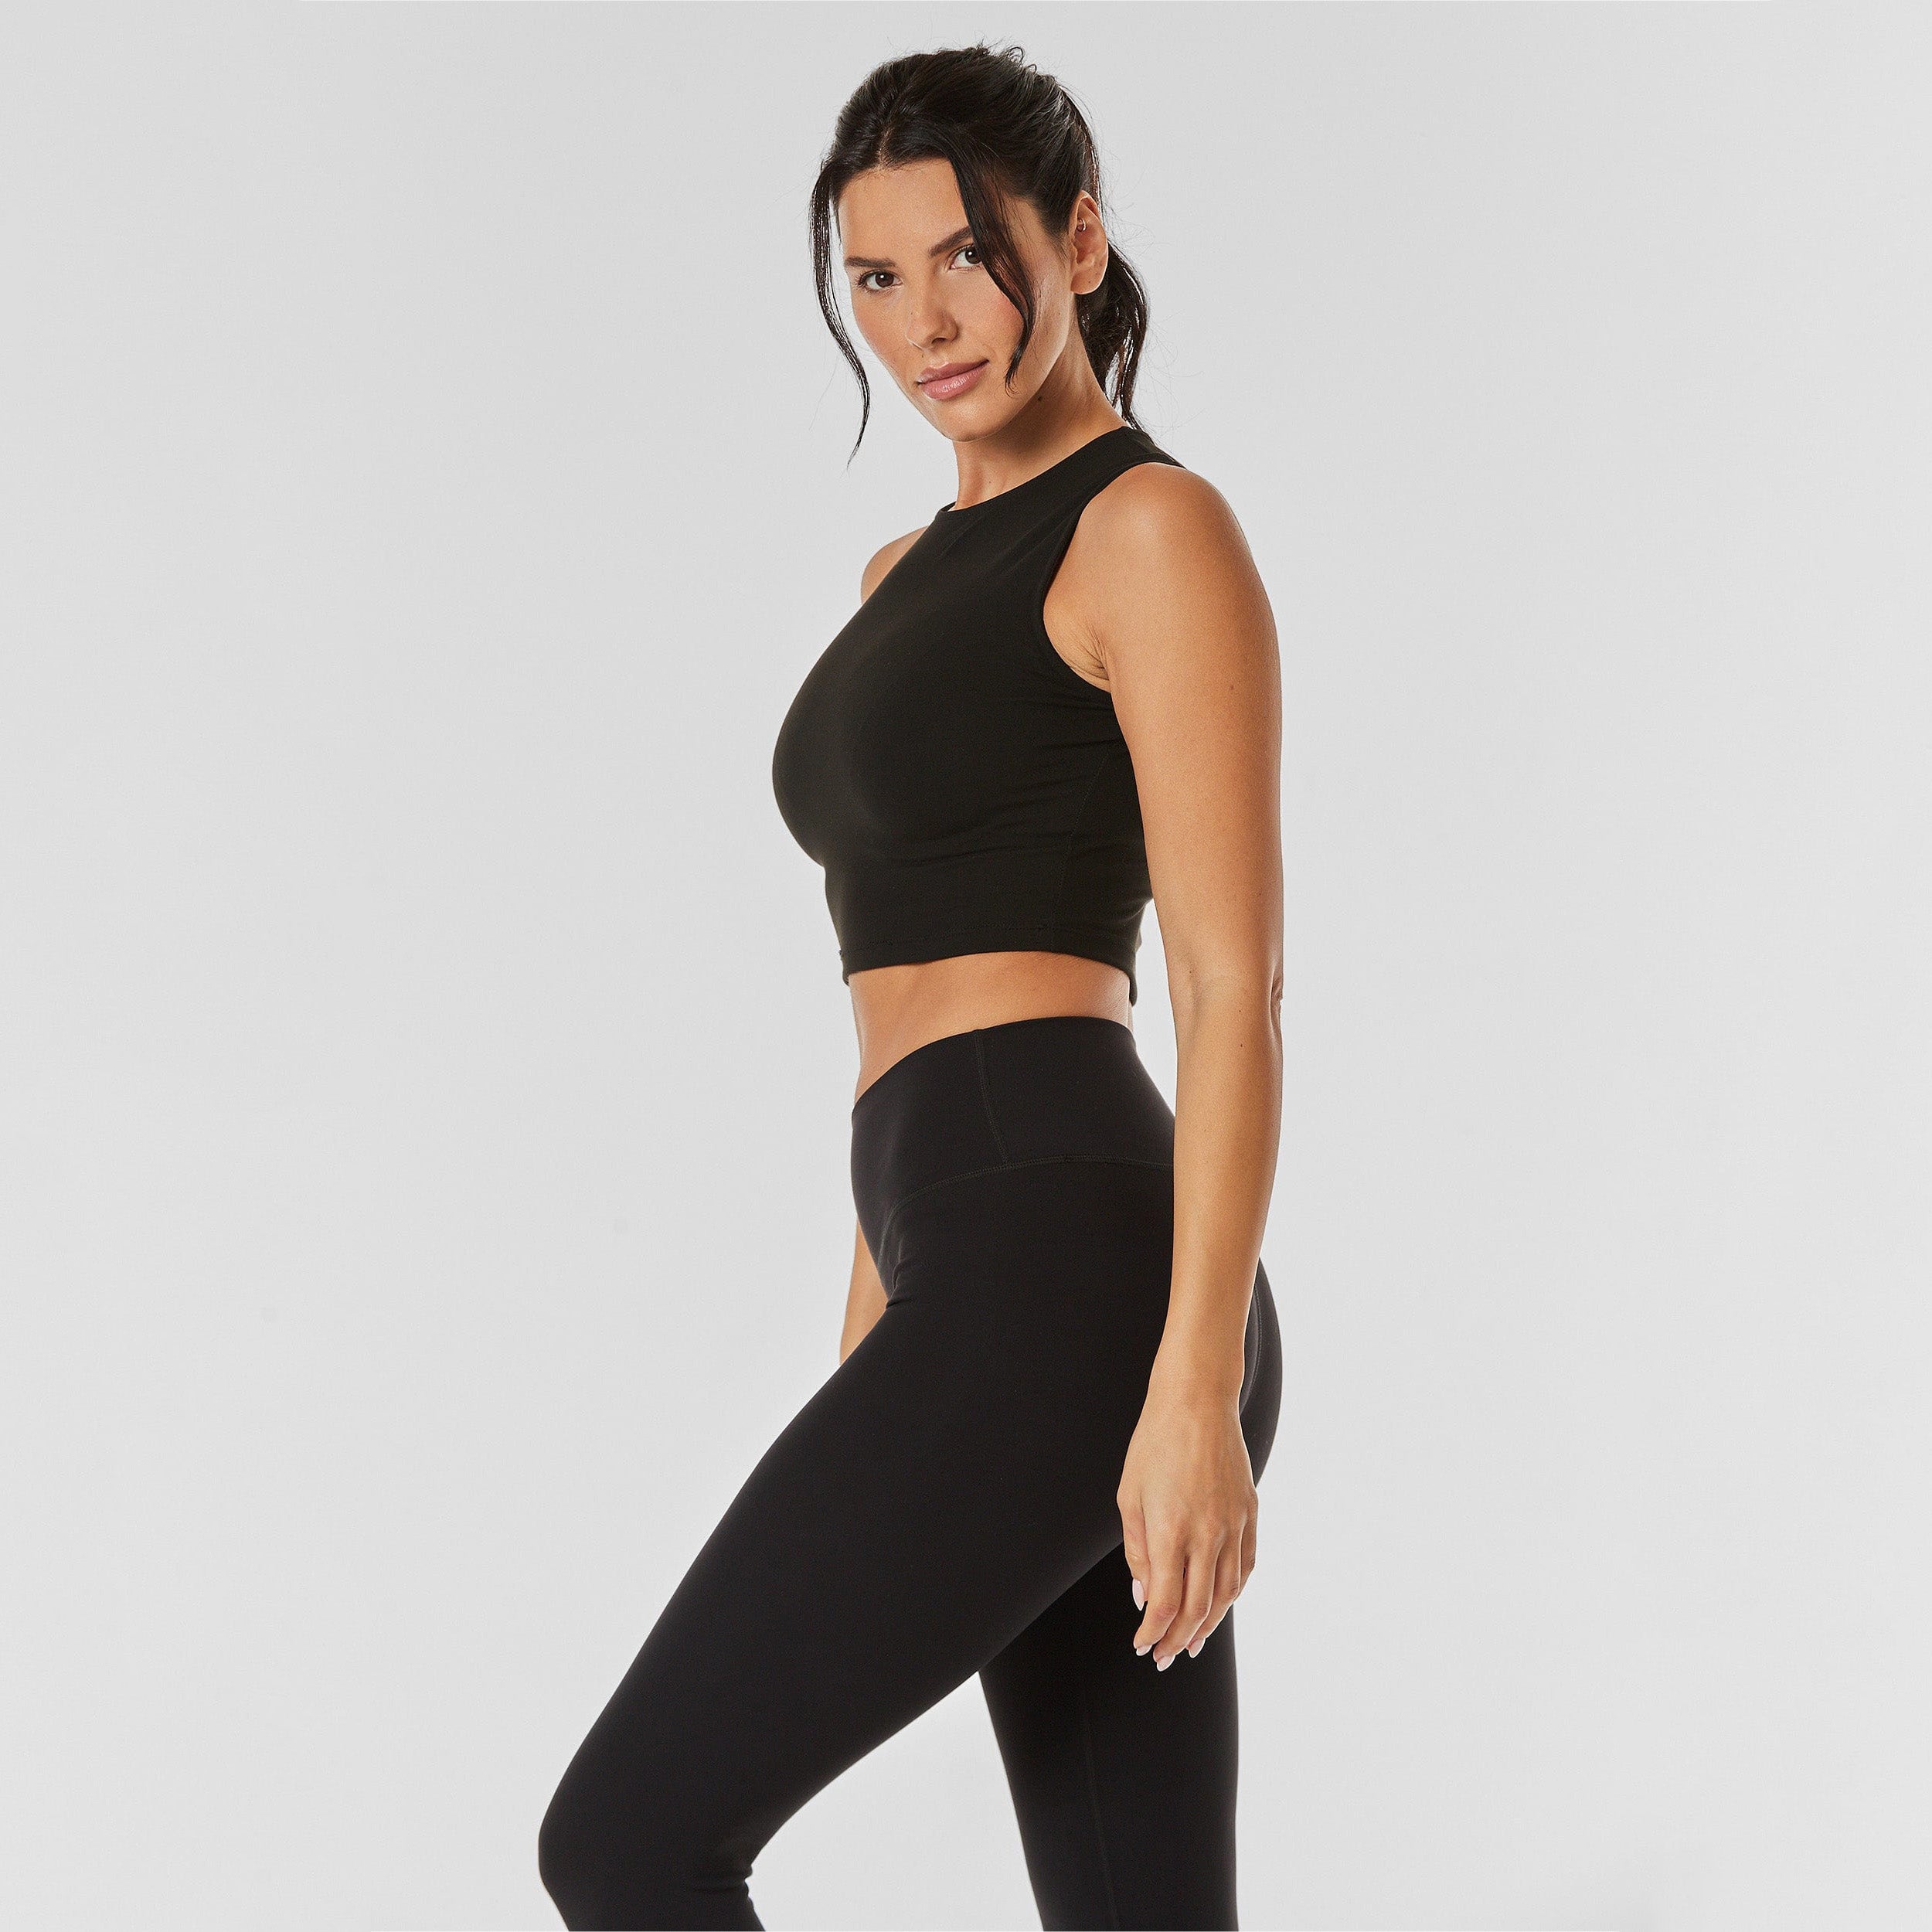 Side view of woman wearing black and matching leggings